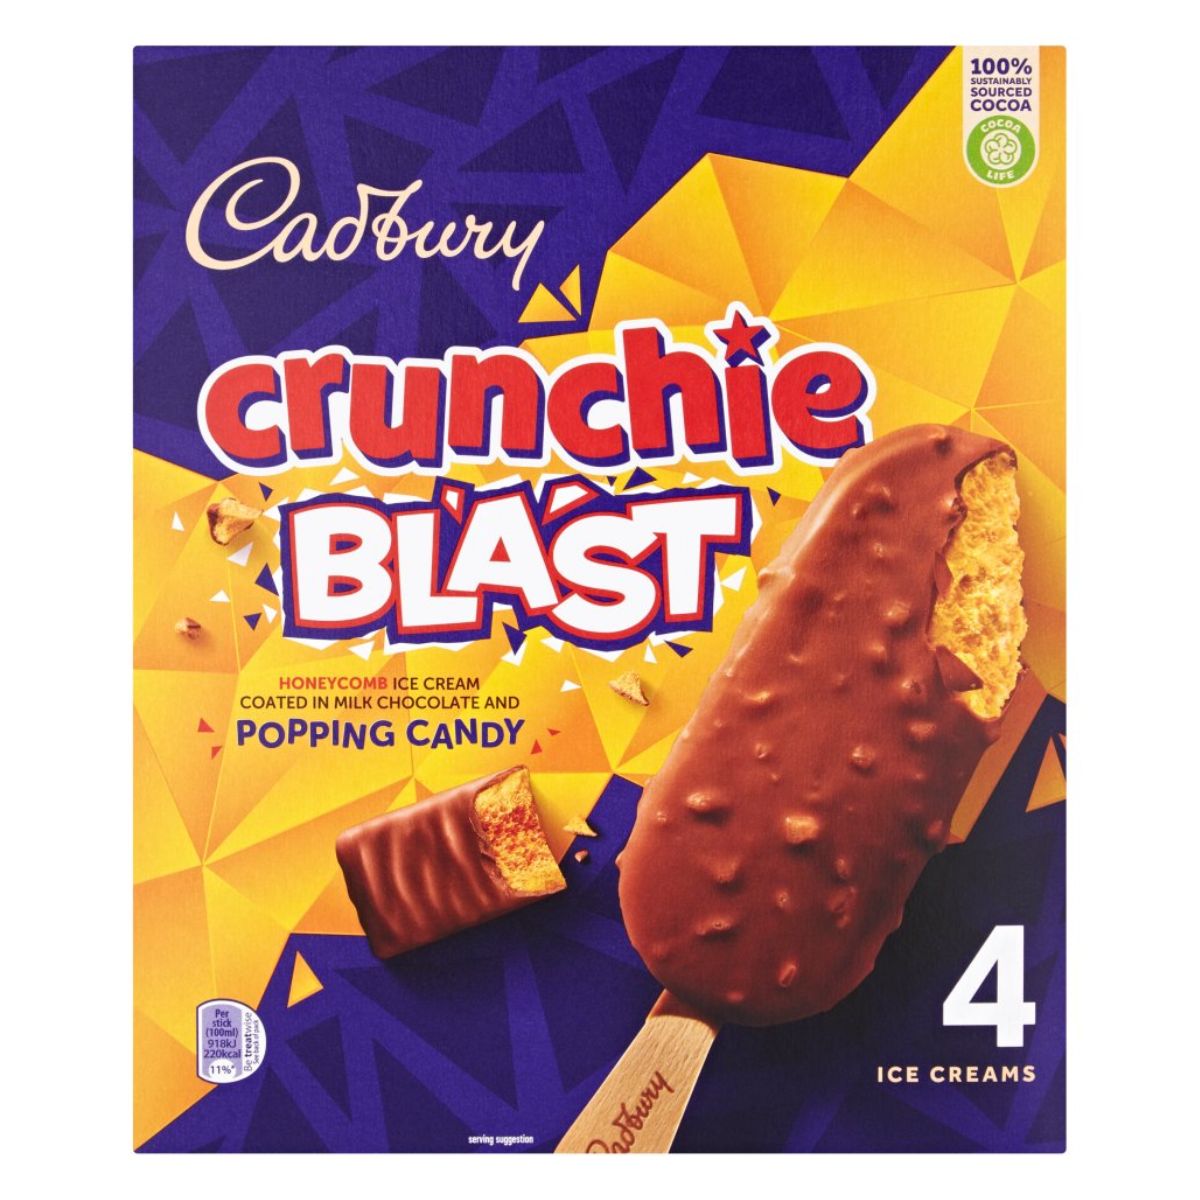 Packaging for Cadbury - Crunchie Blast Ice Cream - 4 x 100ml, featuring a honeycomb cream bar coated in milk chocolate with popping candy, set against a vibrant blue and purple geometric background.